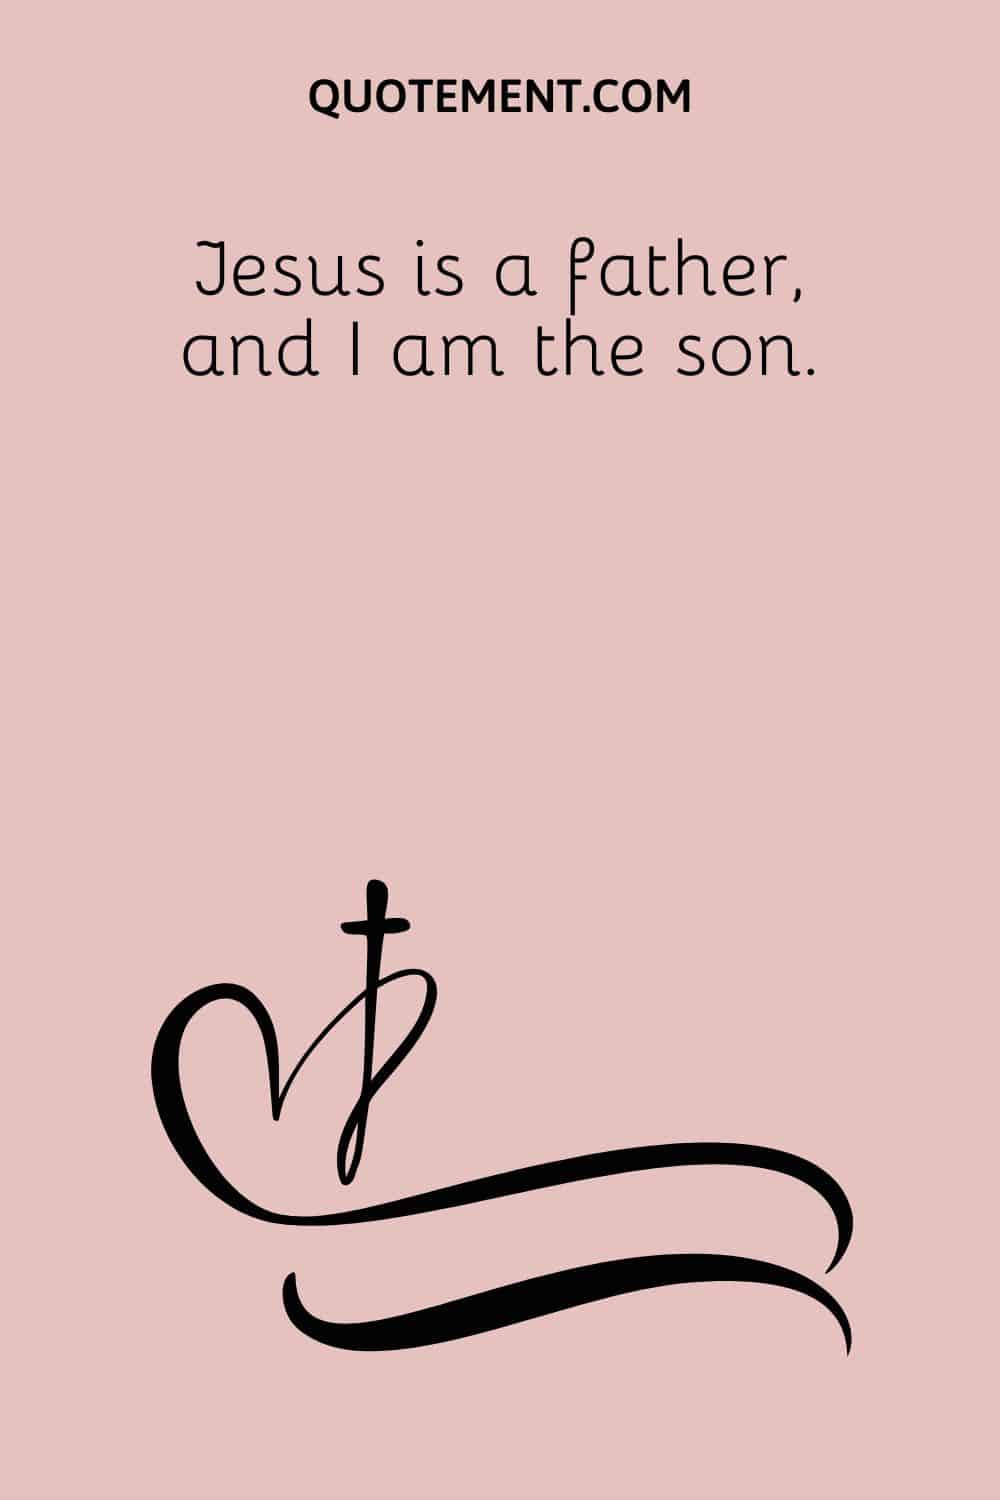 Jesus is a father, and I am the son